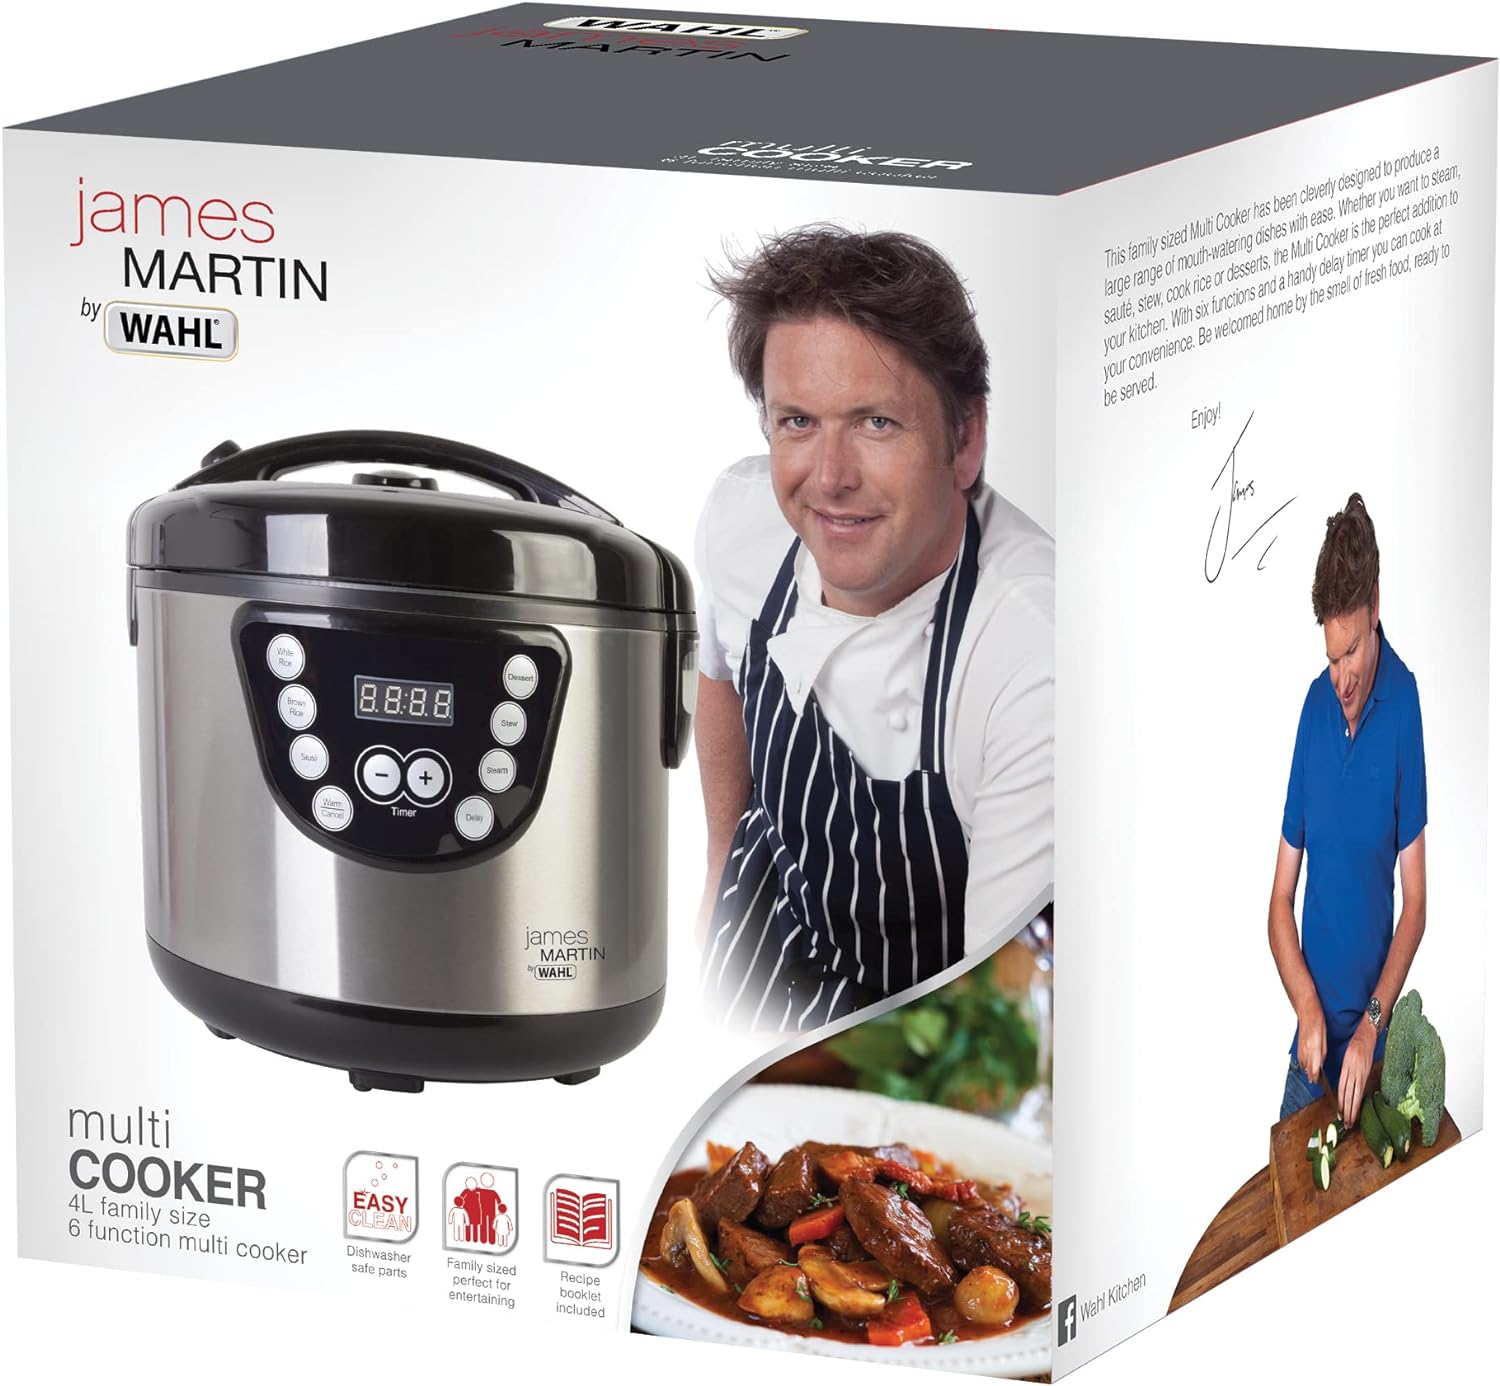 Wahl ZX916 James Martin Multi Cooker, Steaming, Sautéing, Stewing, Cooking, 24 hrs delay timer, 4L Capacity, Stainless Steel